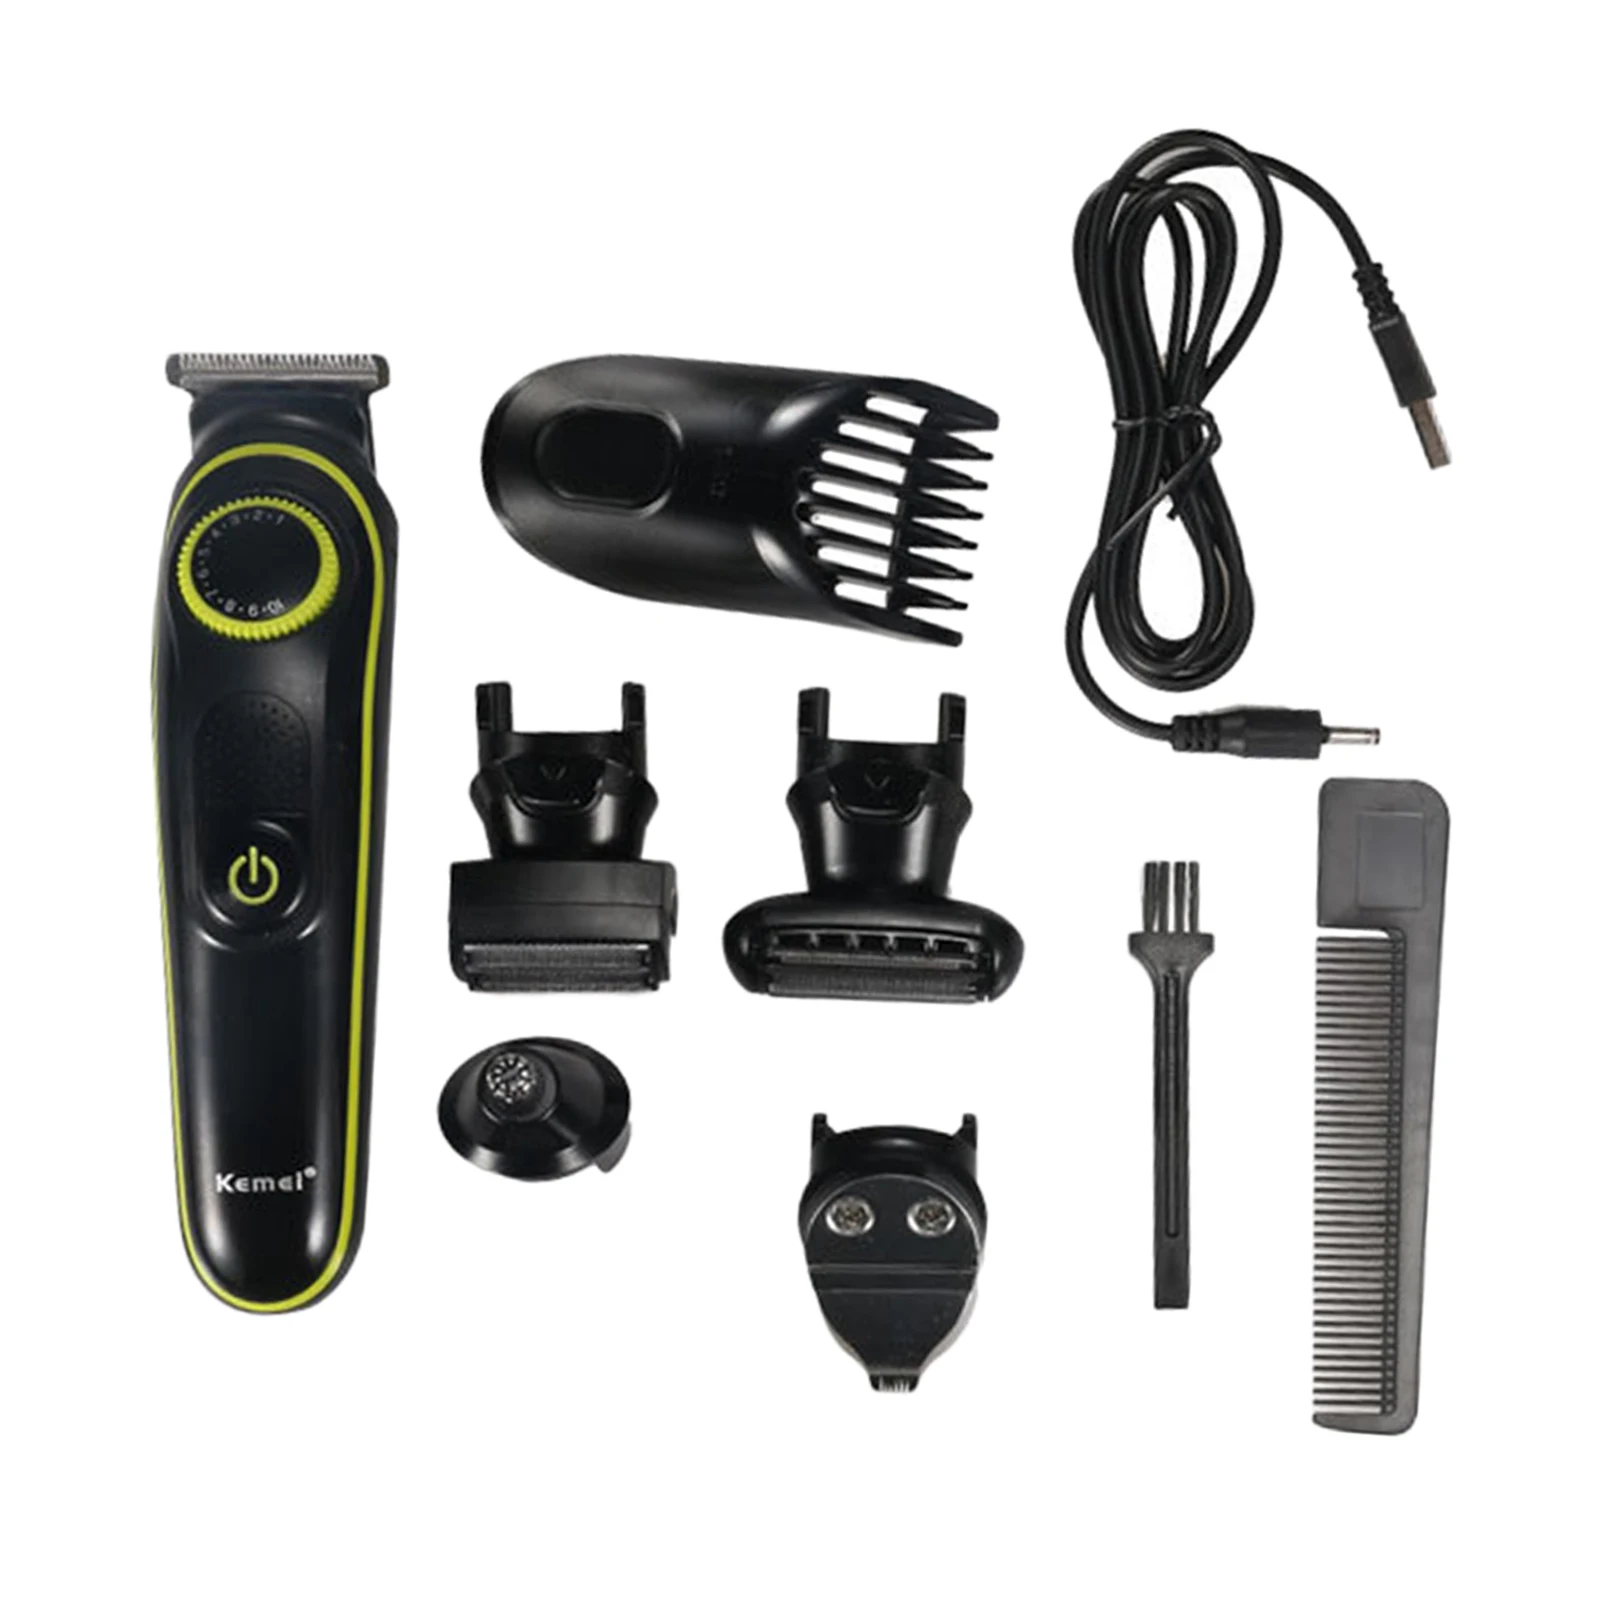 Professional Adjustable Hair Clippers Nose Trimmer Kit for Barbershop Home